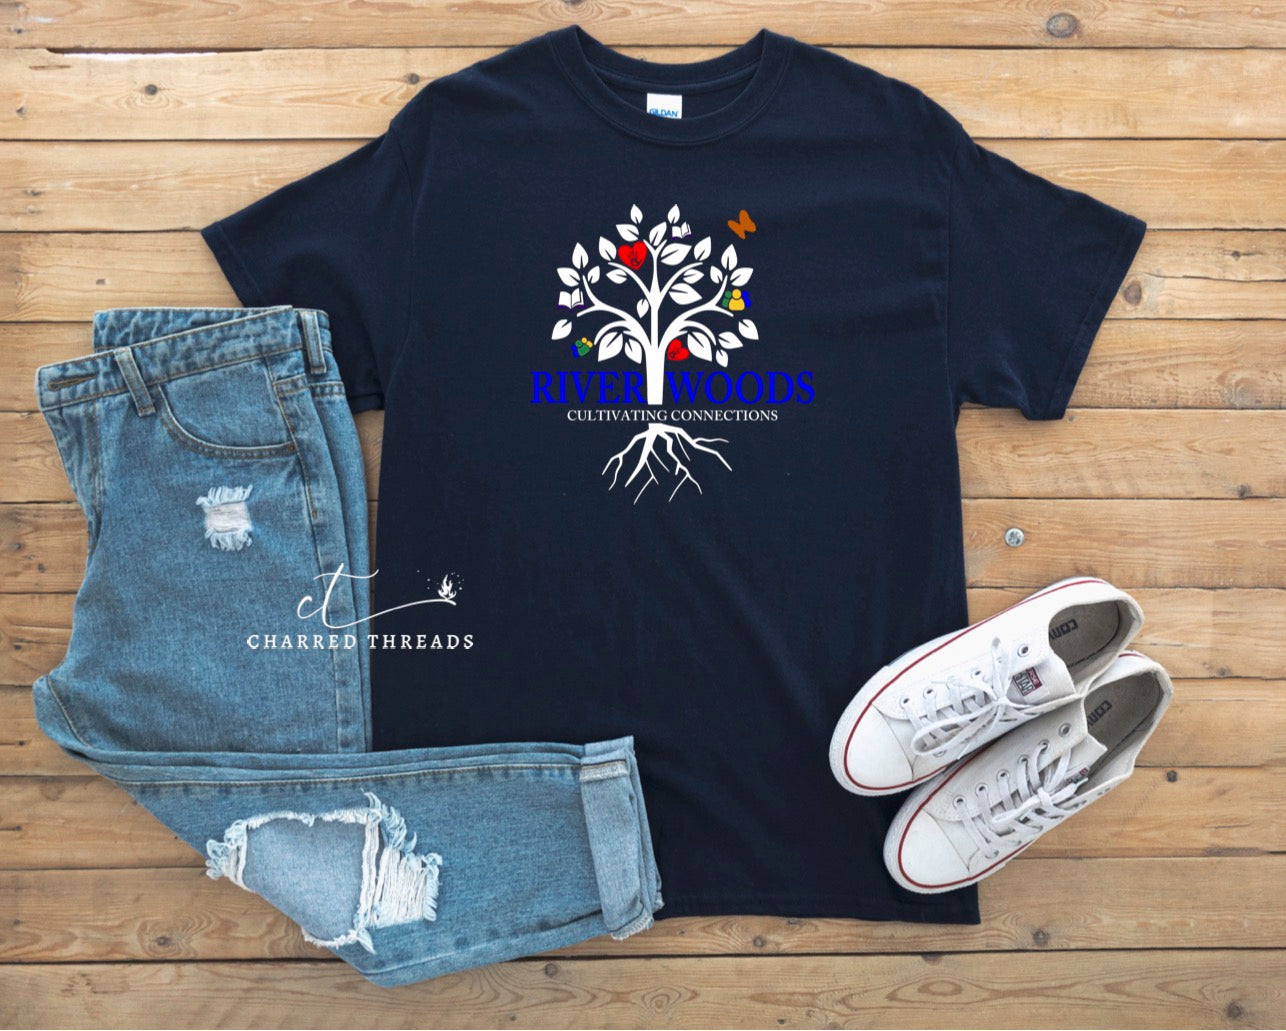 2019 River Woods Elementary Cultivating Connections Short Sleeve Shirt